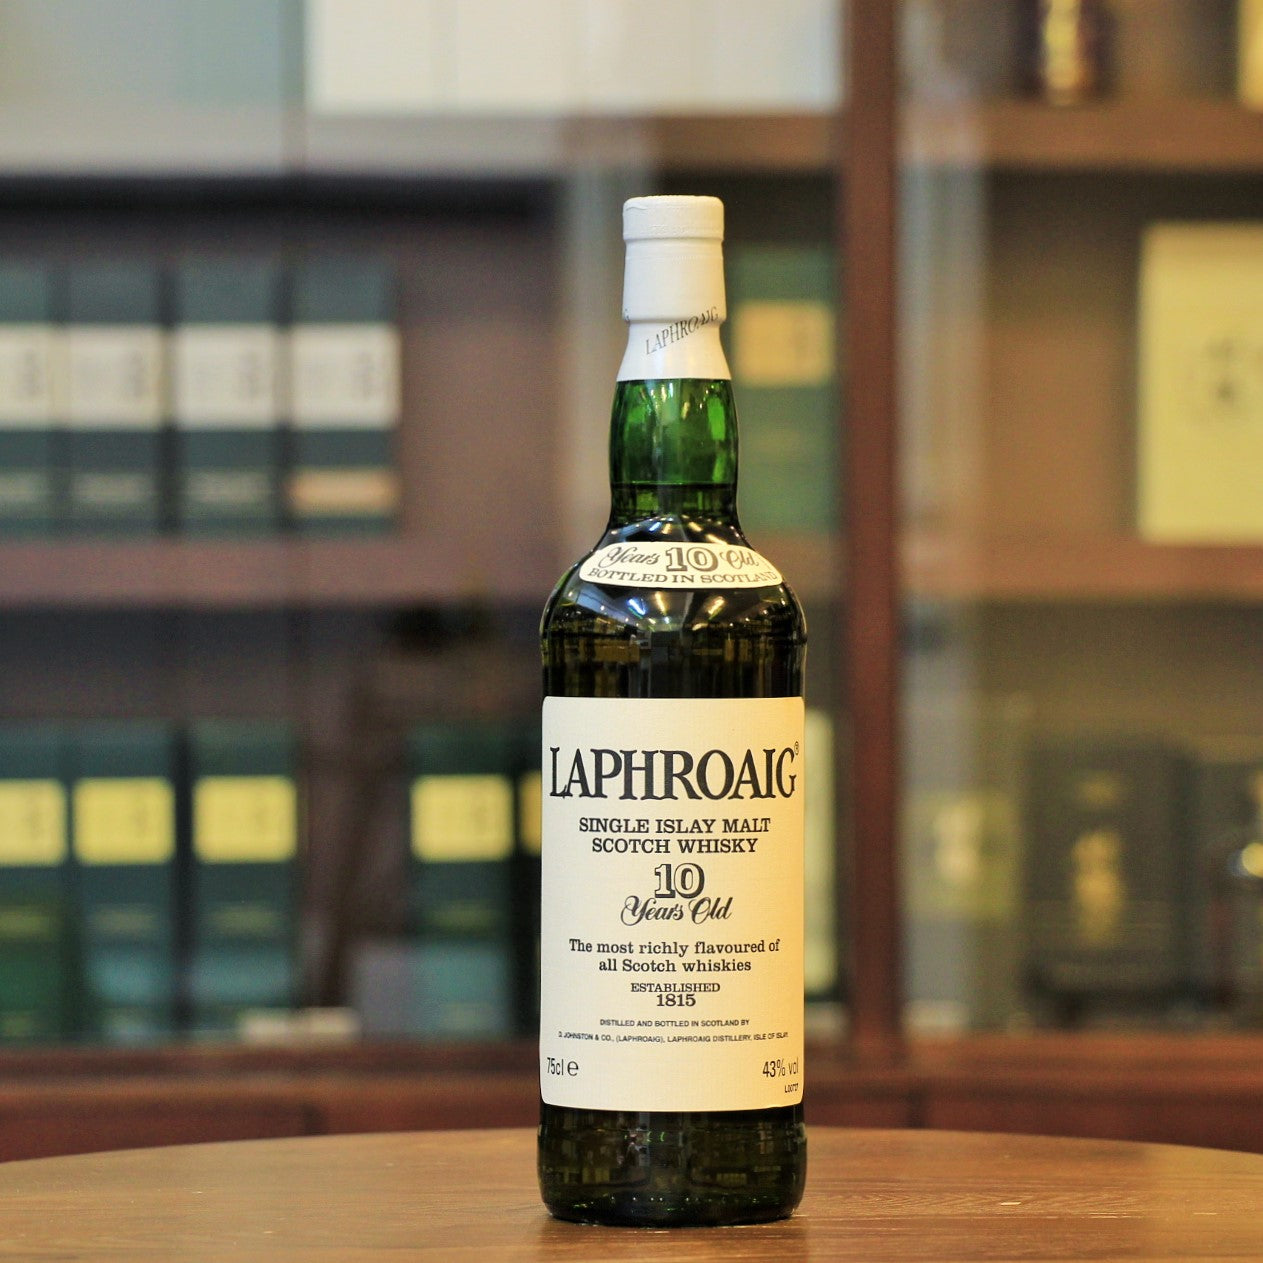 An old style of the Laphroaig 10 Years Old which was released in the 1990s after the royal warrant was awarded to the Distillery in 1994. Bottled at 43%, the back label carries the logo of the warrant.